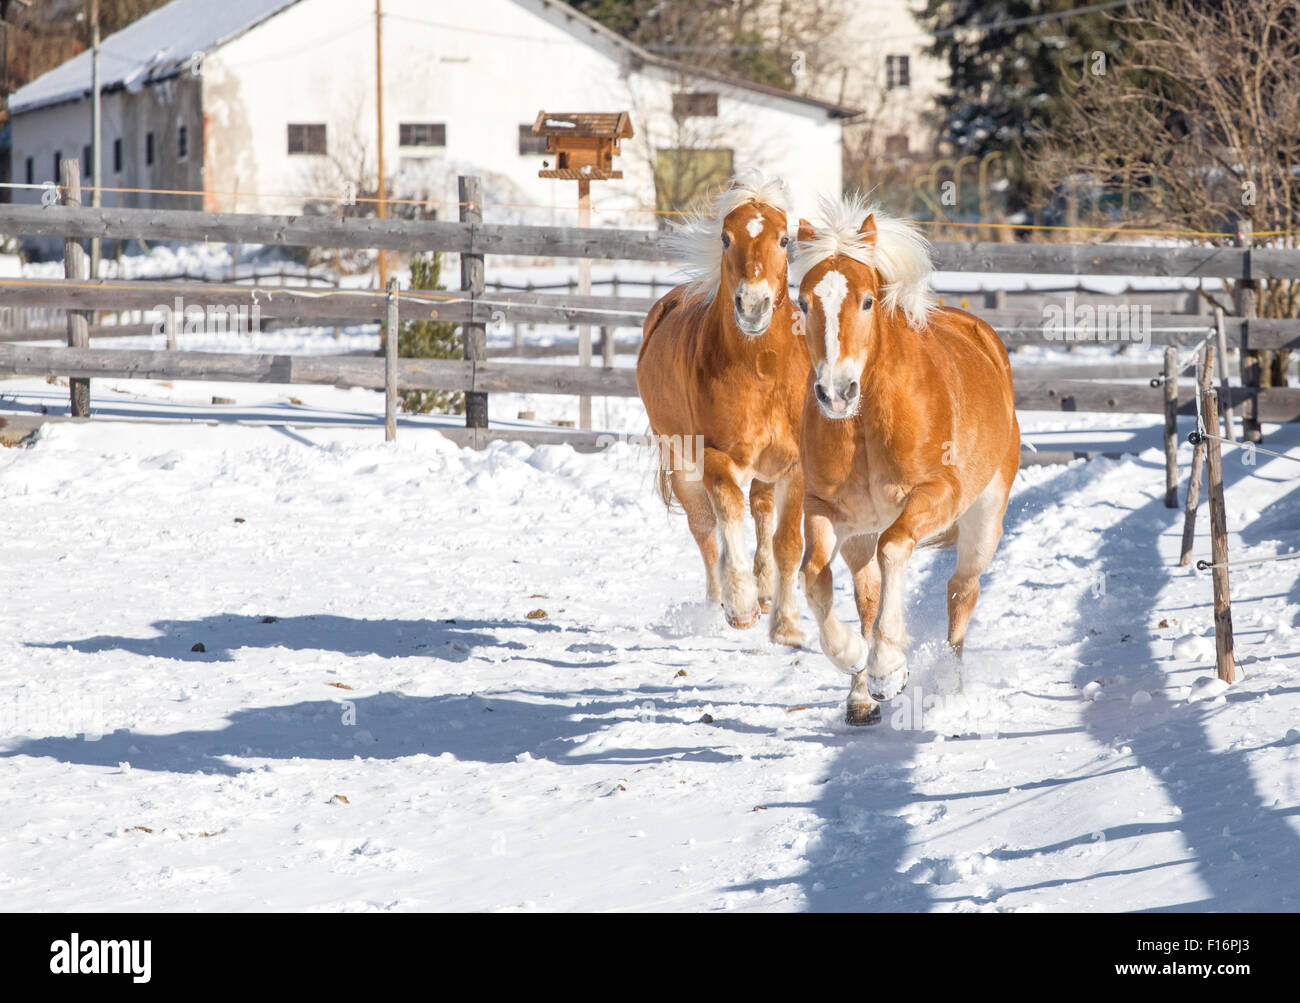 San Candido, Italy, horses galloping across a snowy paddock Stock Photo